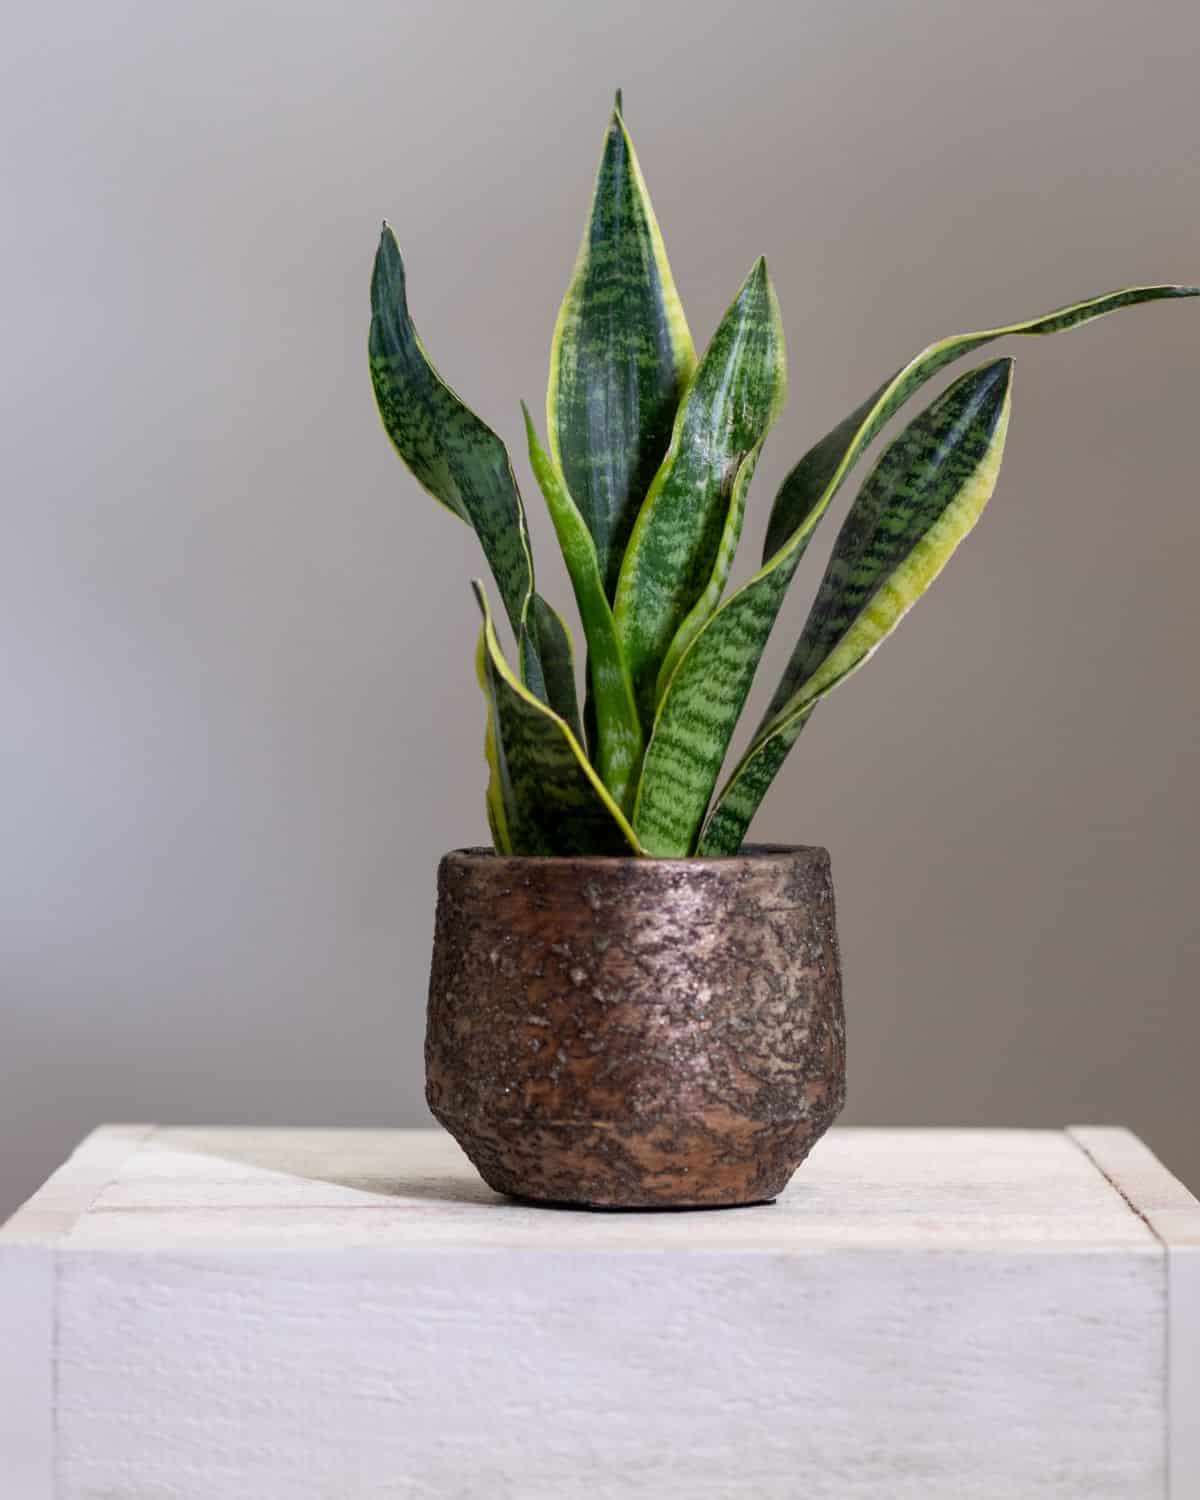 Snake plant growing in an old metal pot on a small table.